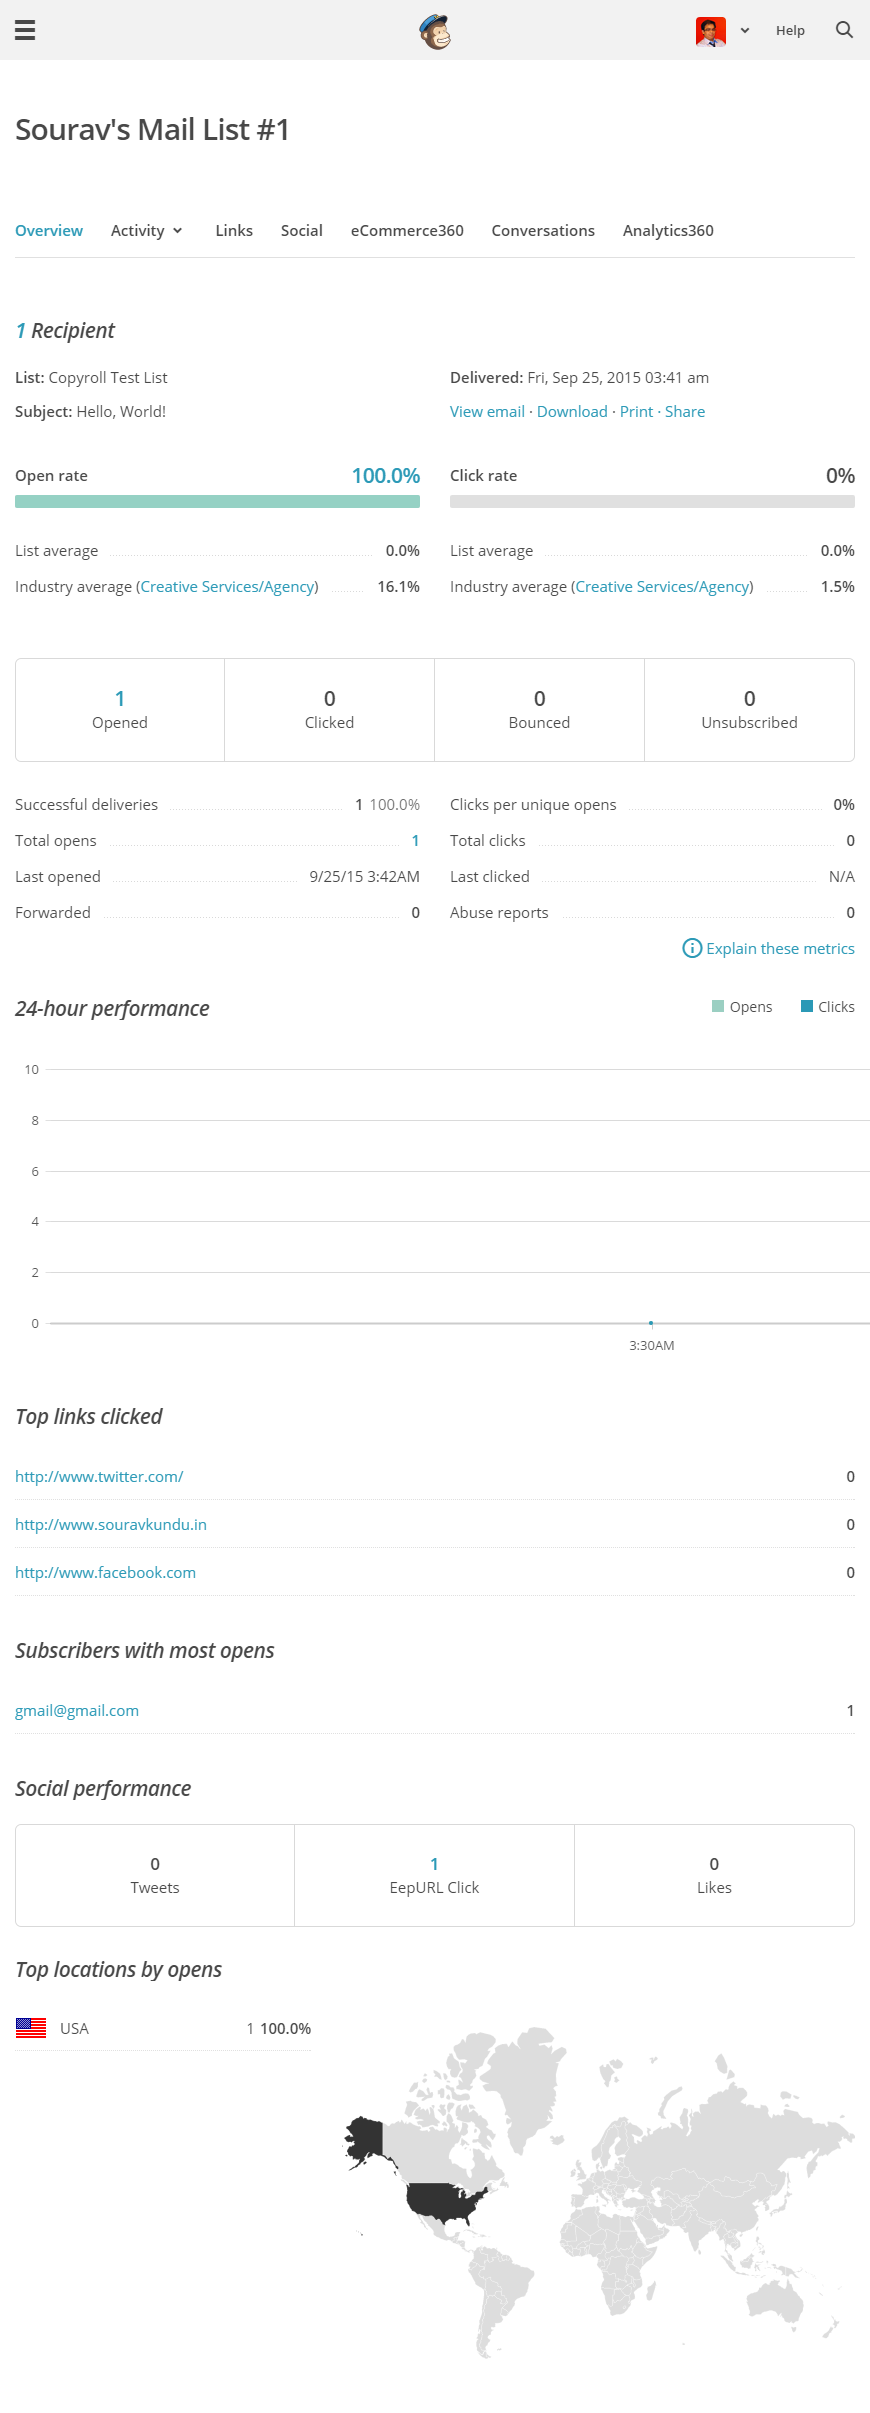 Here's a view of the MailChimp Email Analytics (free version)